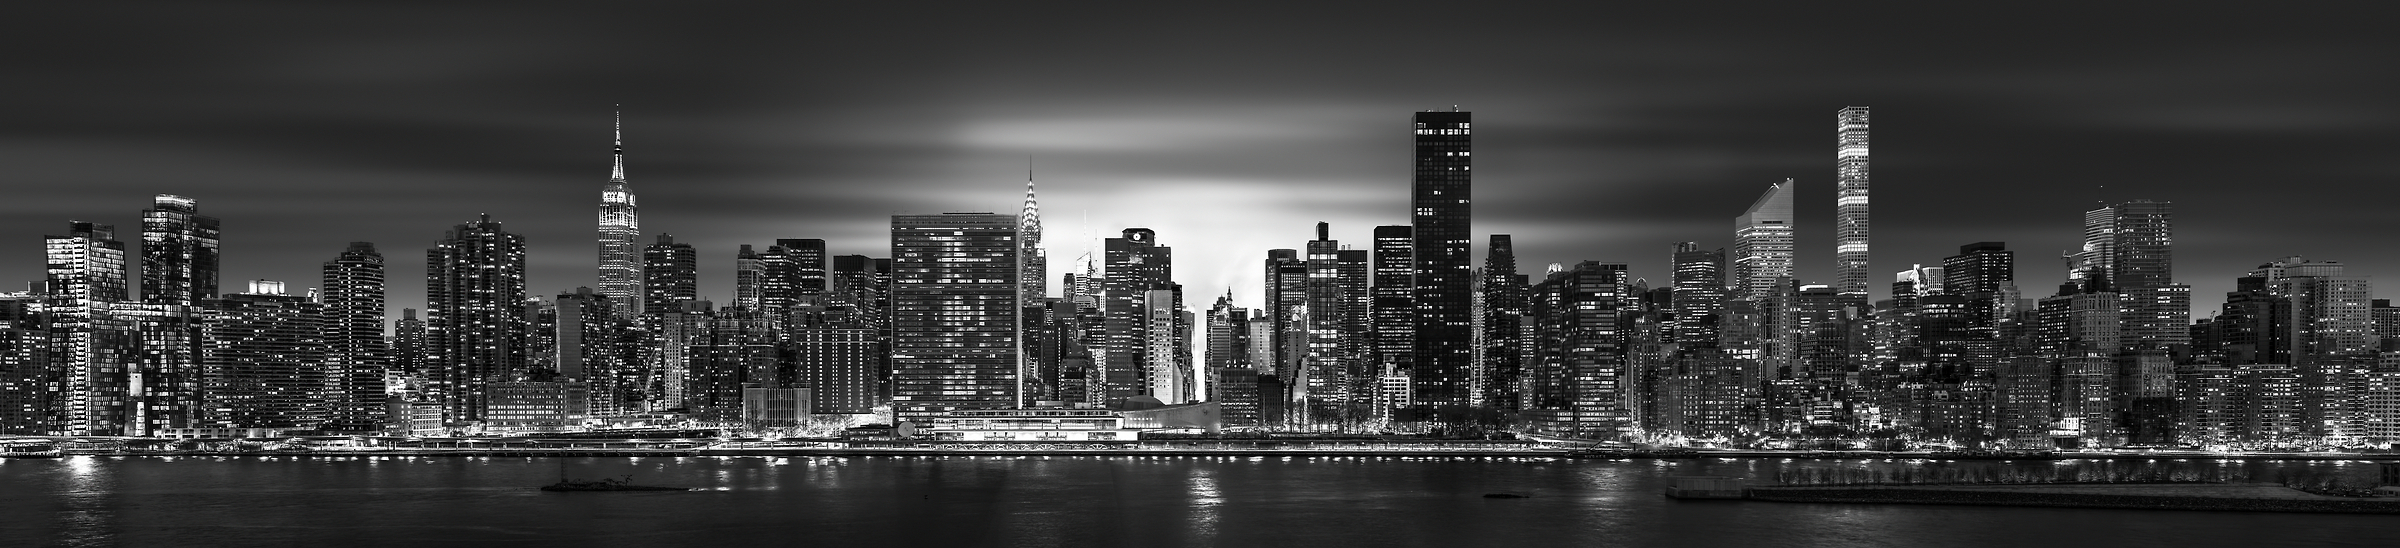 6,410 megapixels! A very high resolution, large-format VAST photo print of the NYC skyline at night with the East River; cityscape photo created by Dan Piech